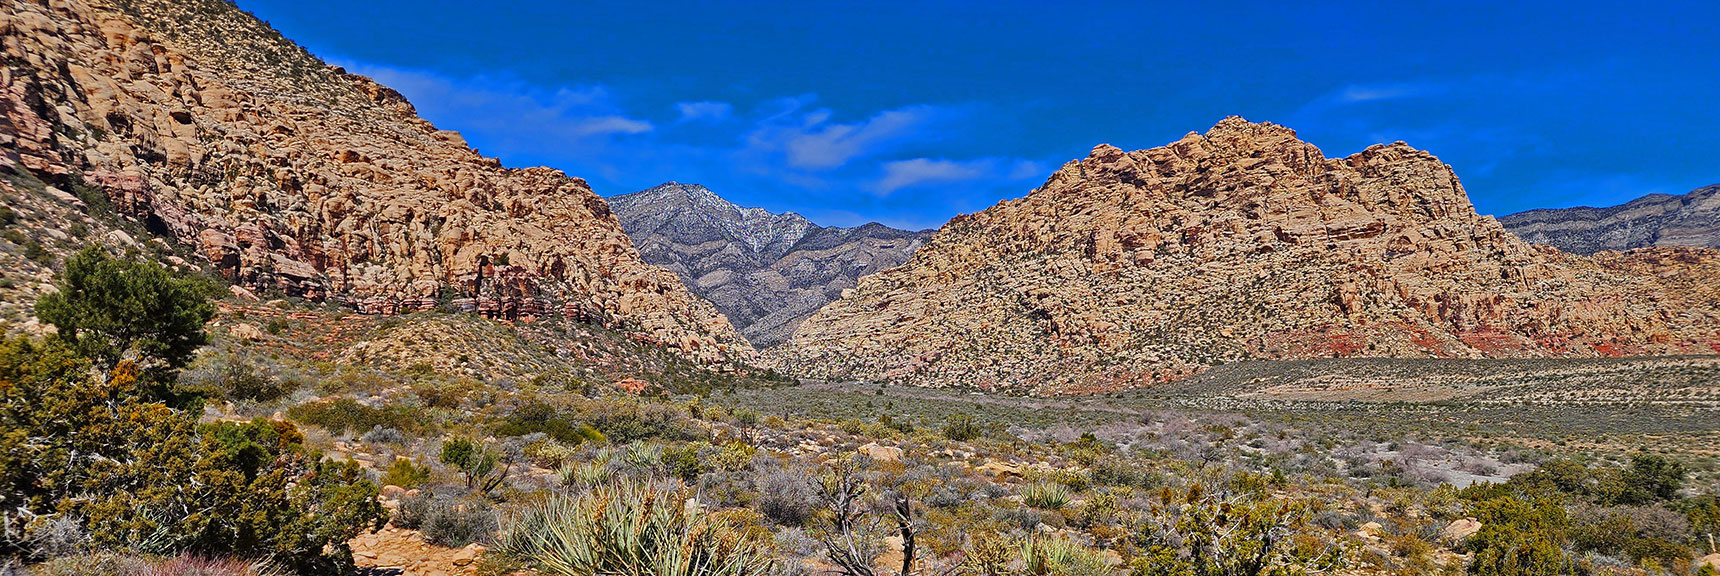 Setting Out Northward on the SMYC Trail Toward White Rock Mountain/Willow Spring | SMYC Trail | Red Rock Canyon National Conservation Area, Nevada | David Smith | LasVegasAreaTrails.com